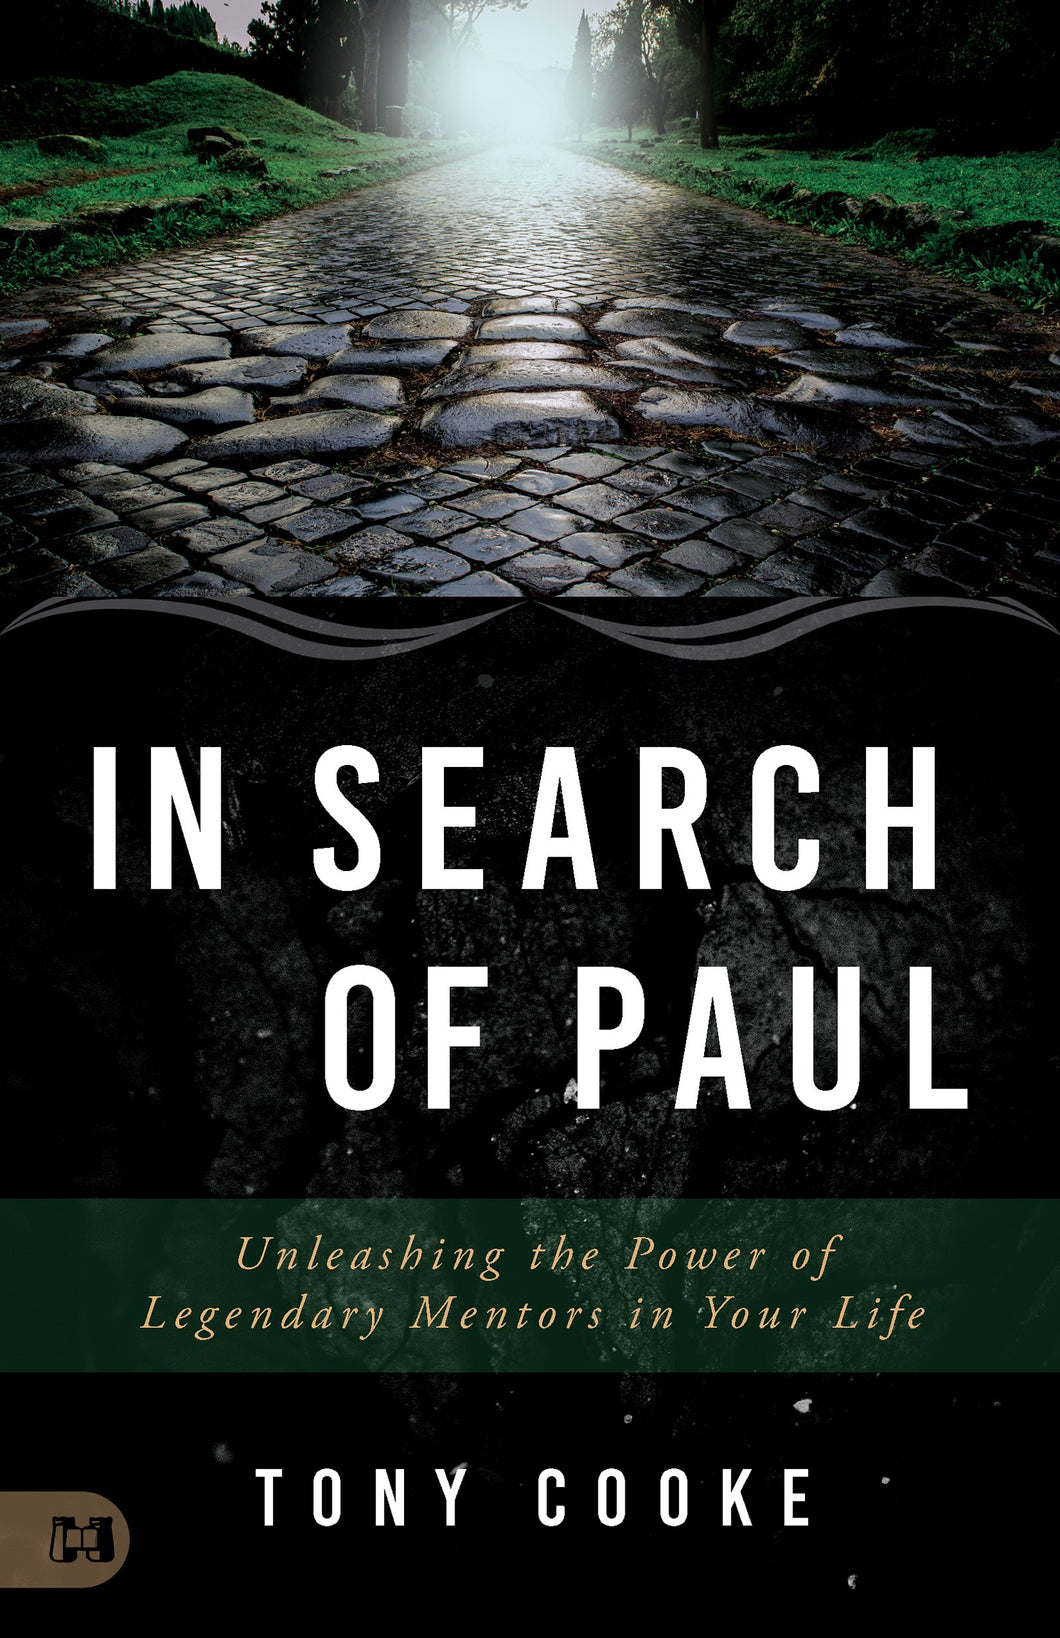 In Search of Paul